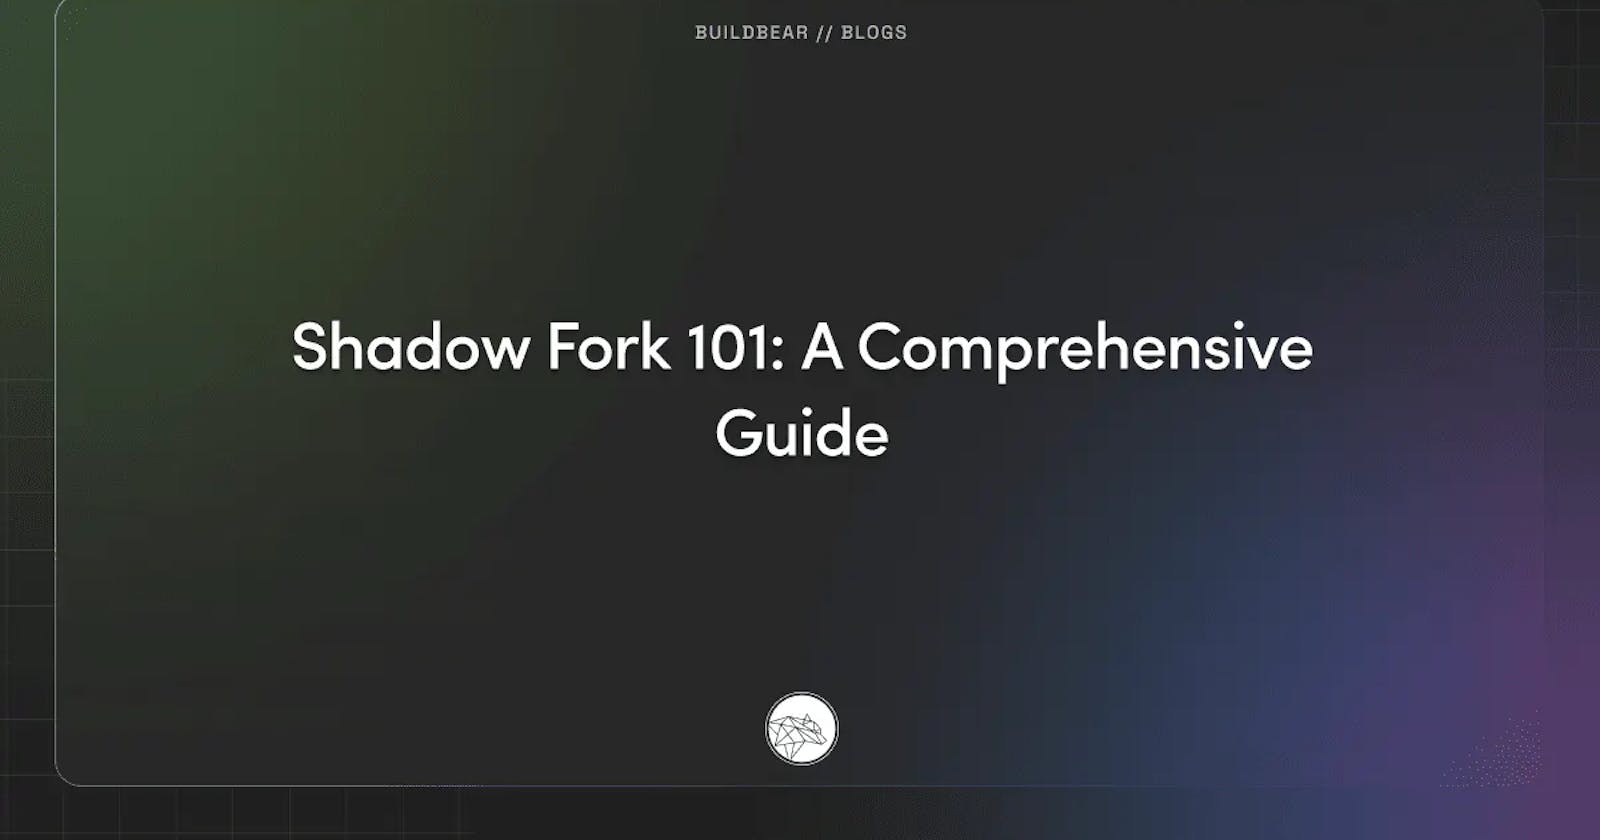 Shadow Fork 101: A Comprehensive Guide